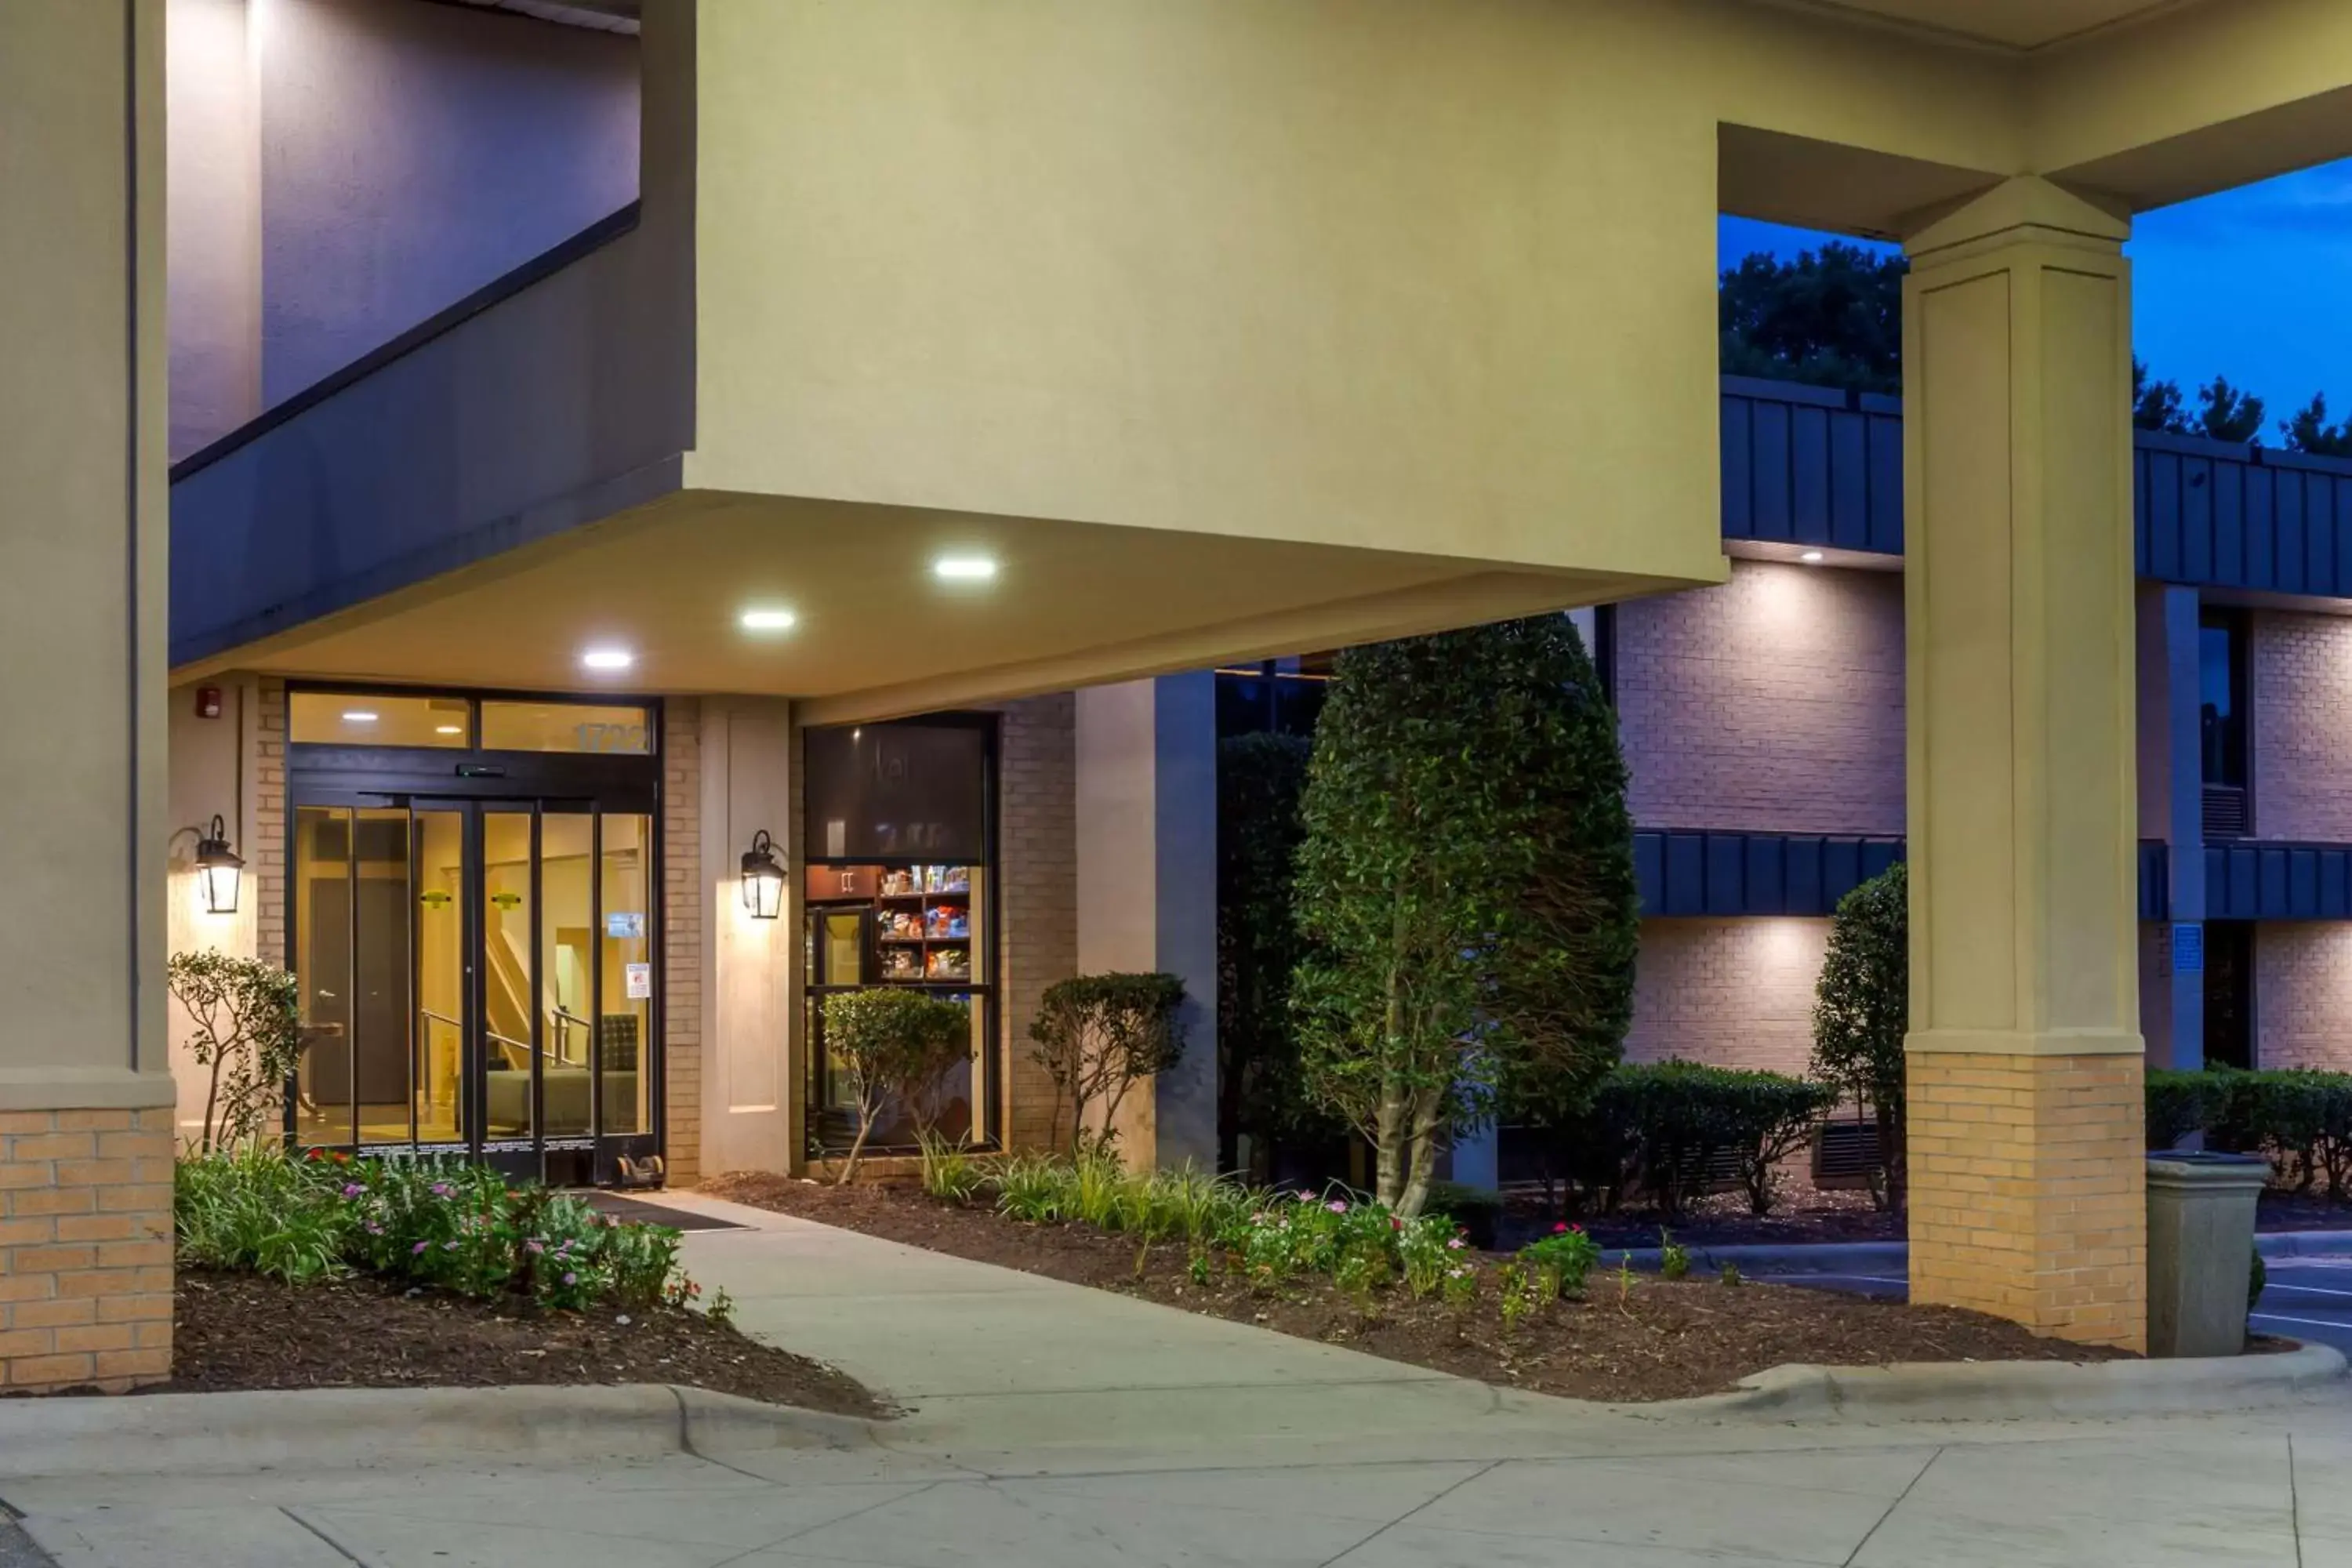 Property building in Best Western Plus Cary - NC State